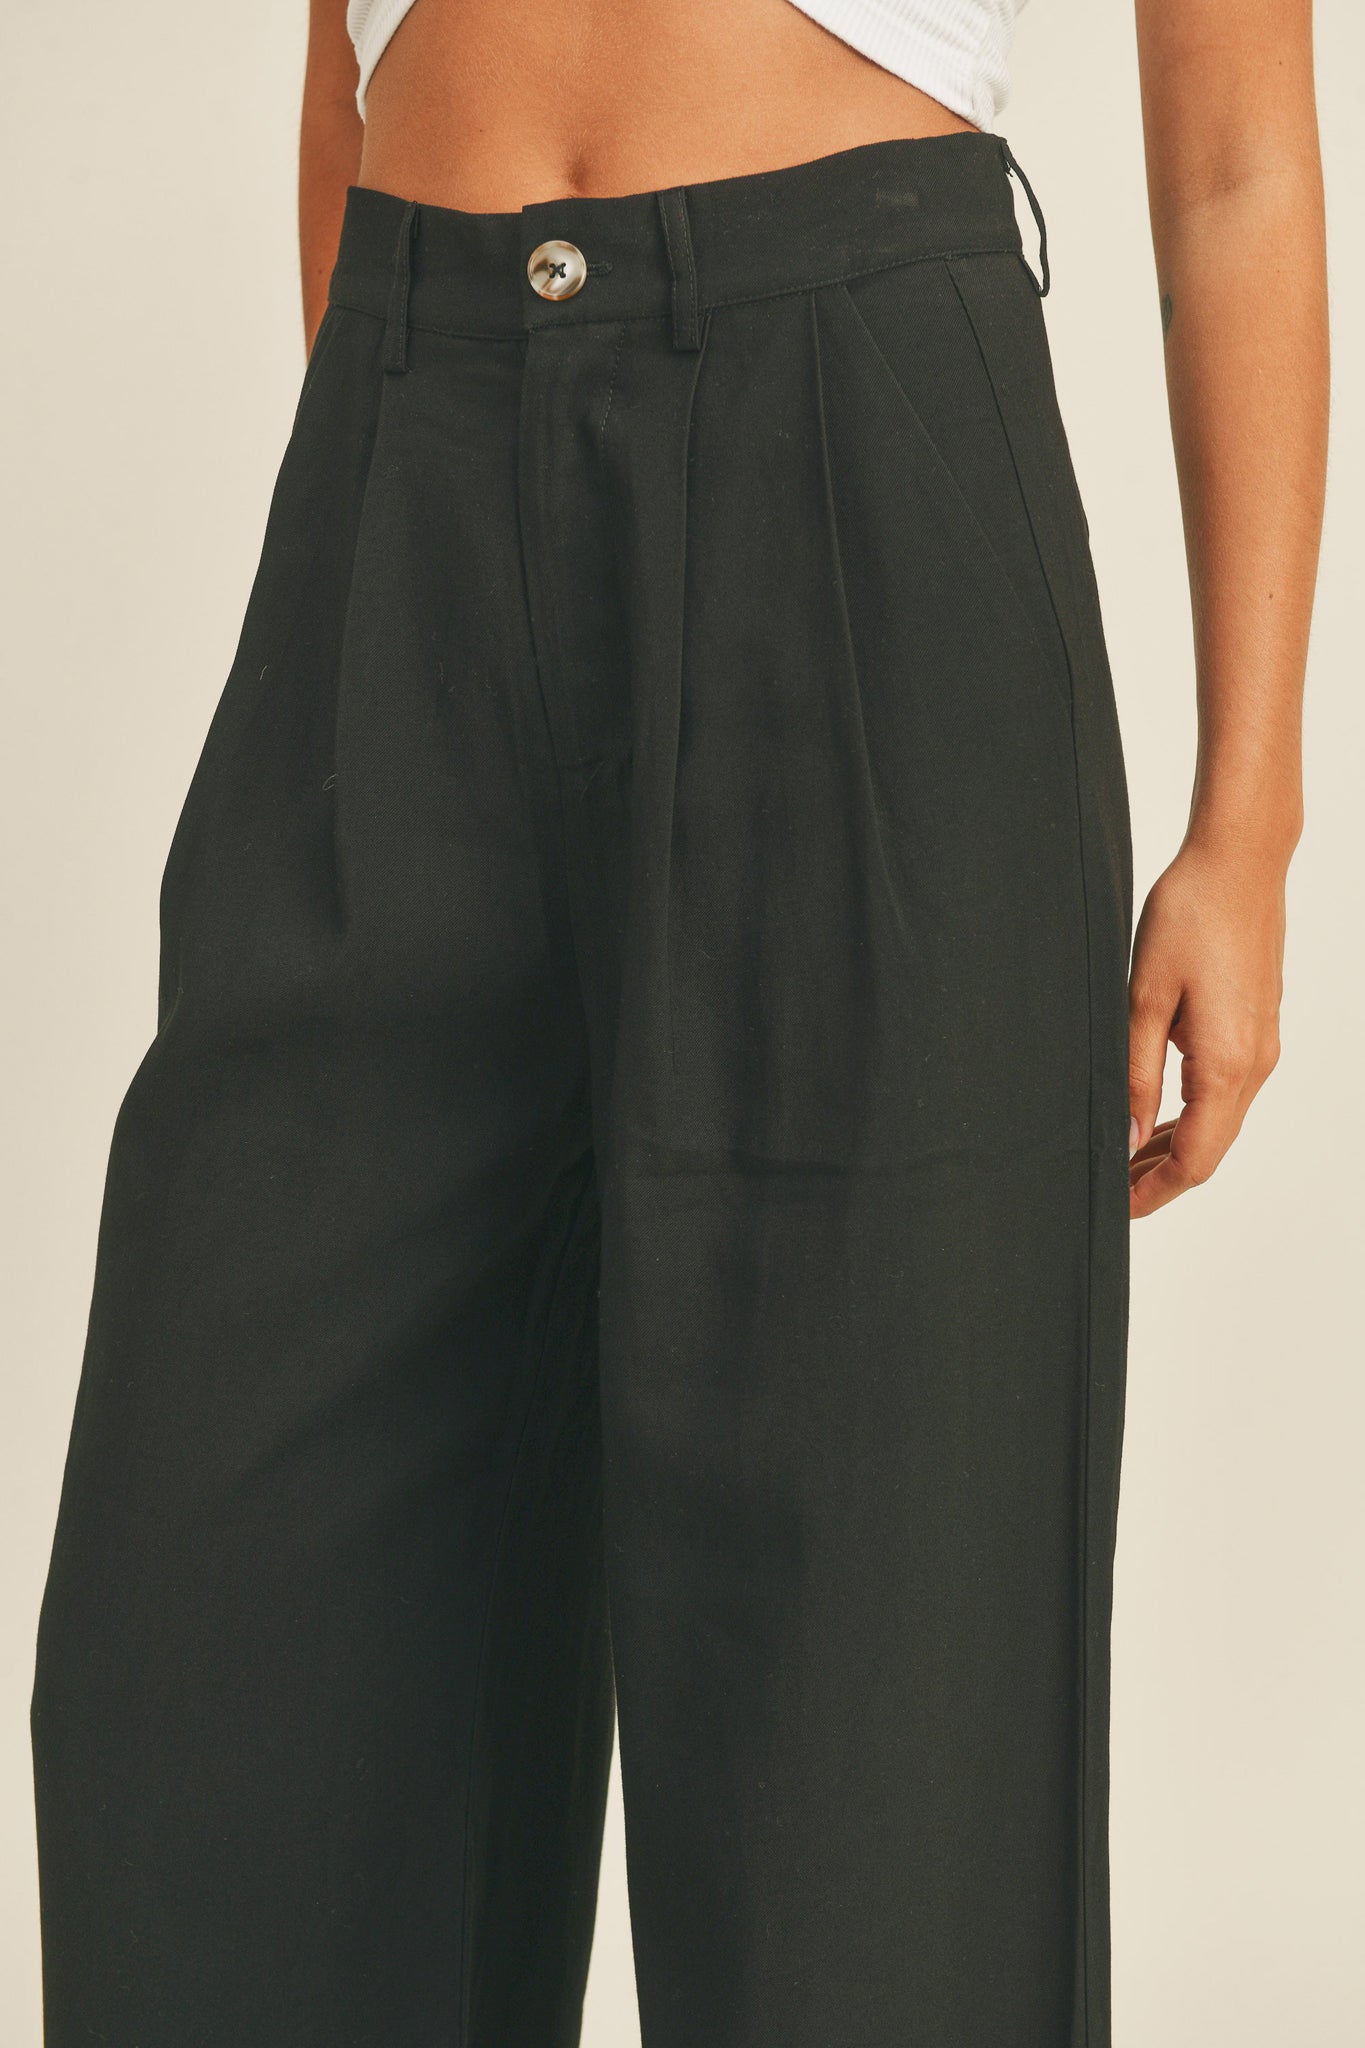 View 4 of Arid Trousers in Black, a Pants from Larrea Cove. Detail: .